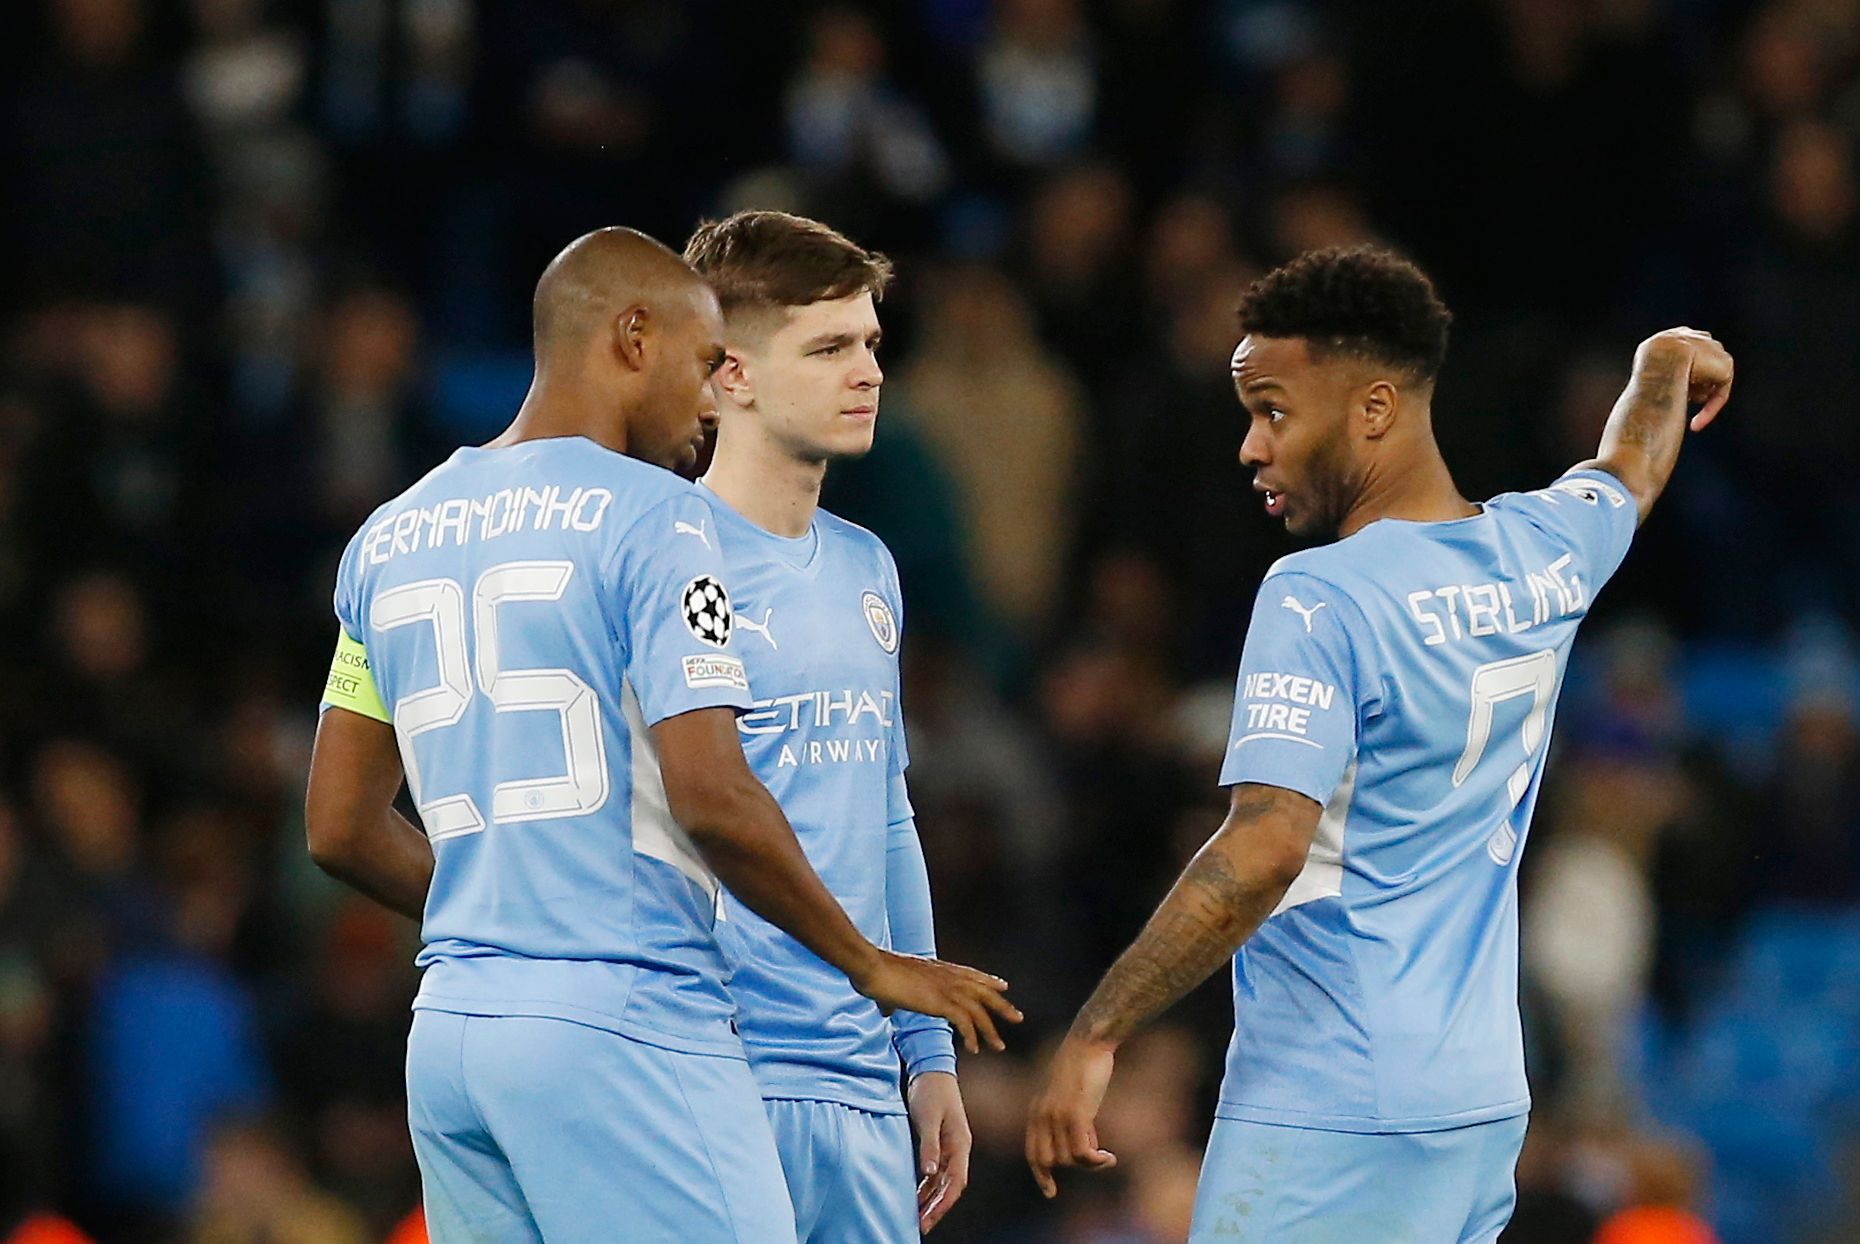 Soccer Football - Champions League - Round of 16 Second Leg - Manchester City v Sporting CP - Etihad Stadium, Manchester, Britain - March 9, 2022  Manchester City's Fernandinho, James Mcatee and Raheem Sterling before the start of the second half REUTERS/Craig Brough